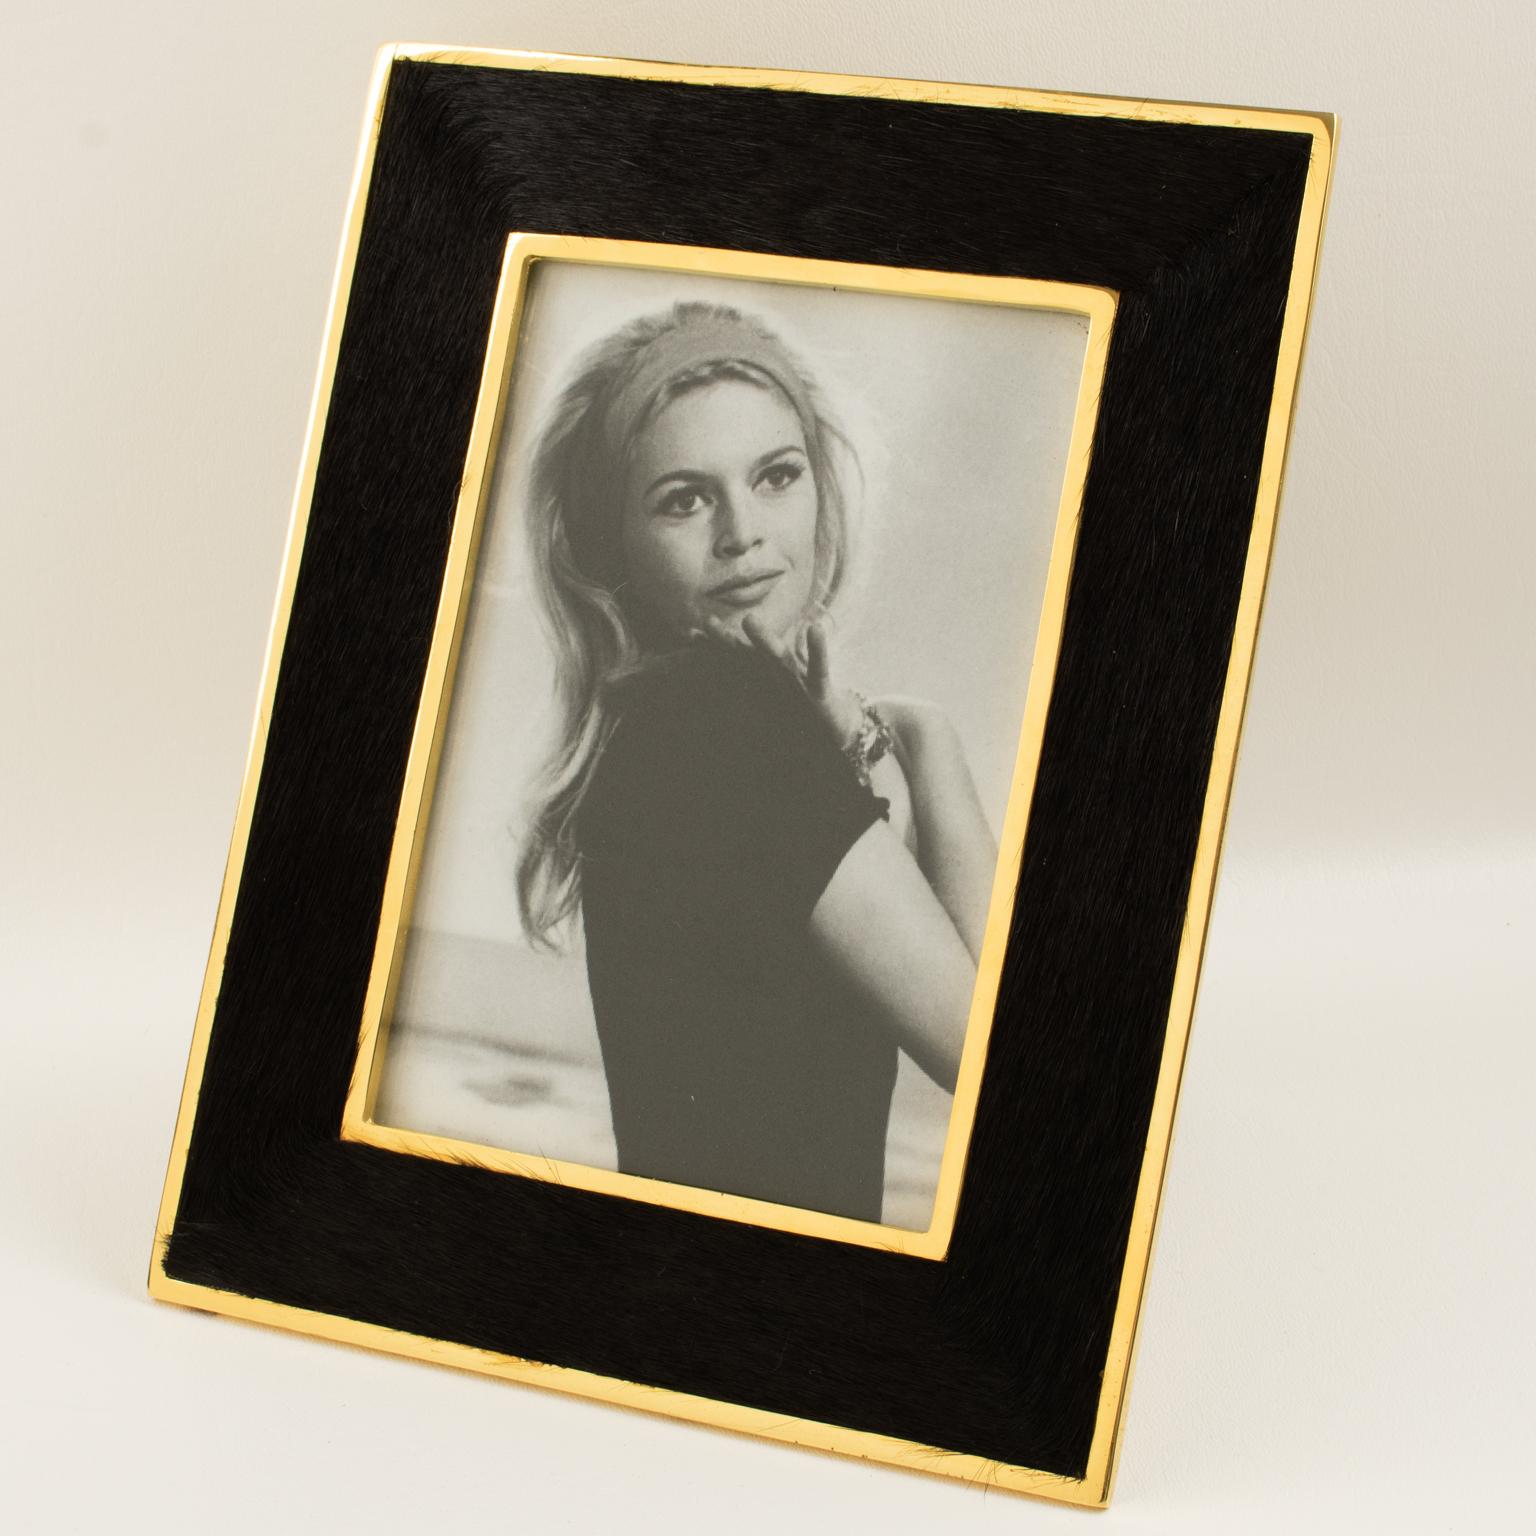 French designer Edouard Rambaud designed this gorgeous gilt metal and fur picture photo frame in the 1980s. The geometric shape boasts a brushed gilded metal framing ornate with poney leather-fur. The poney fur has a lovely dark chocolate brown